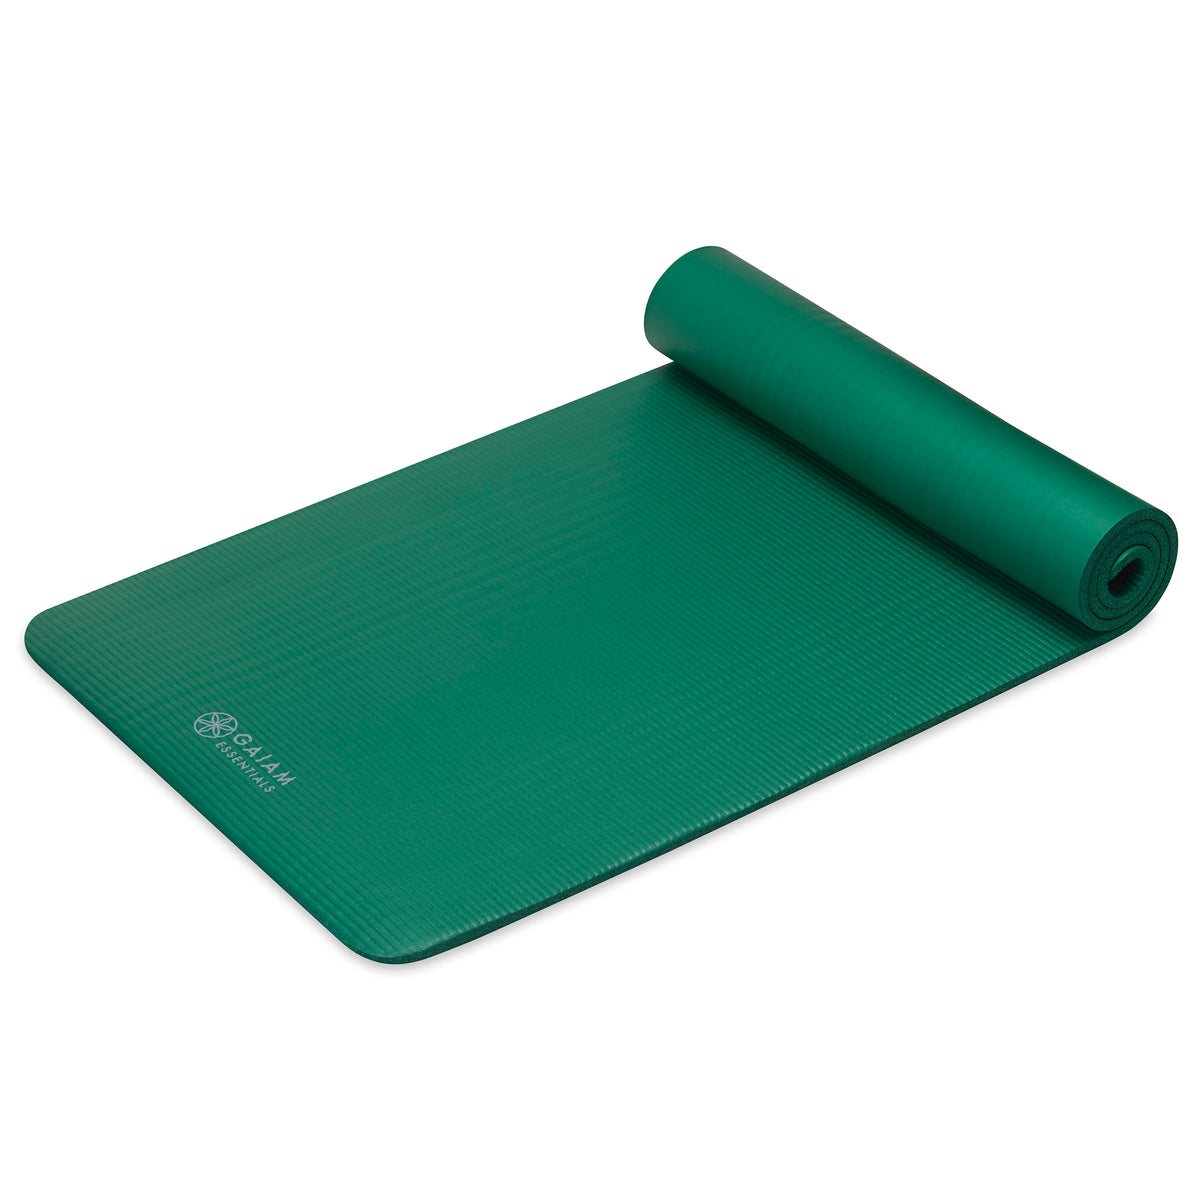 GAIAM Deep Surf Yoga Mat Bag., Sports Equipment, Exercise & Fitness,  Exercise Mats on Carousell